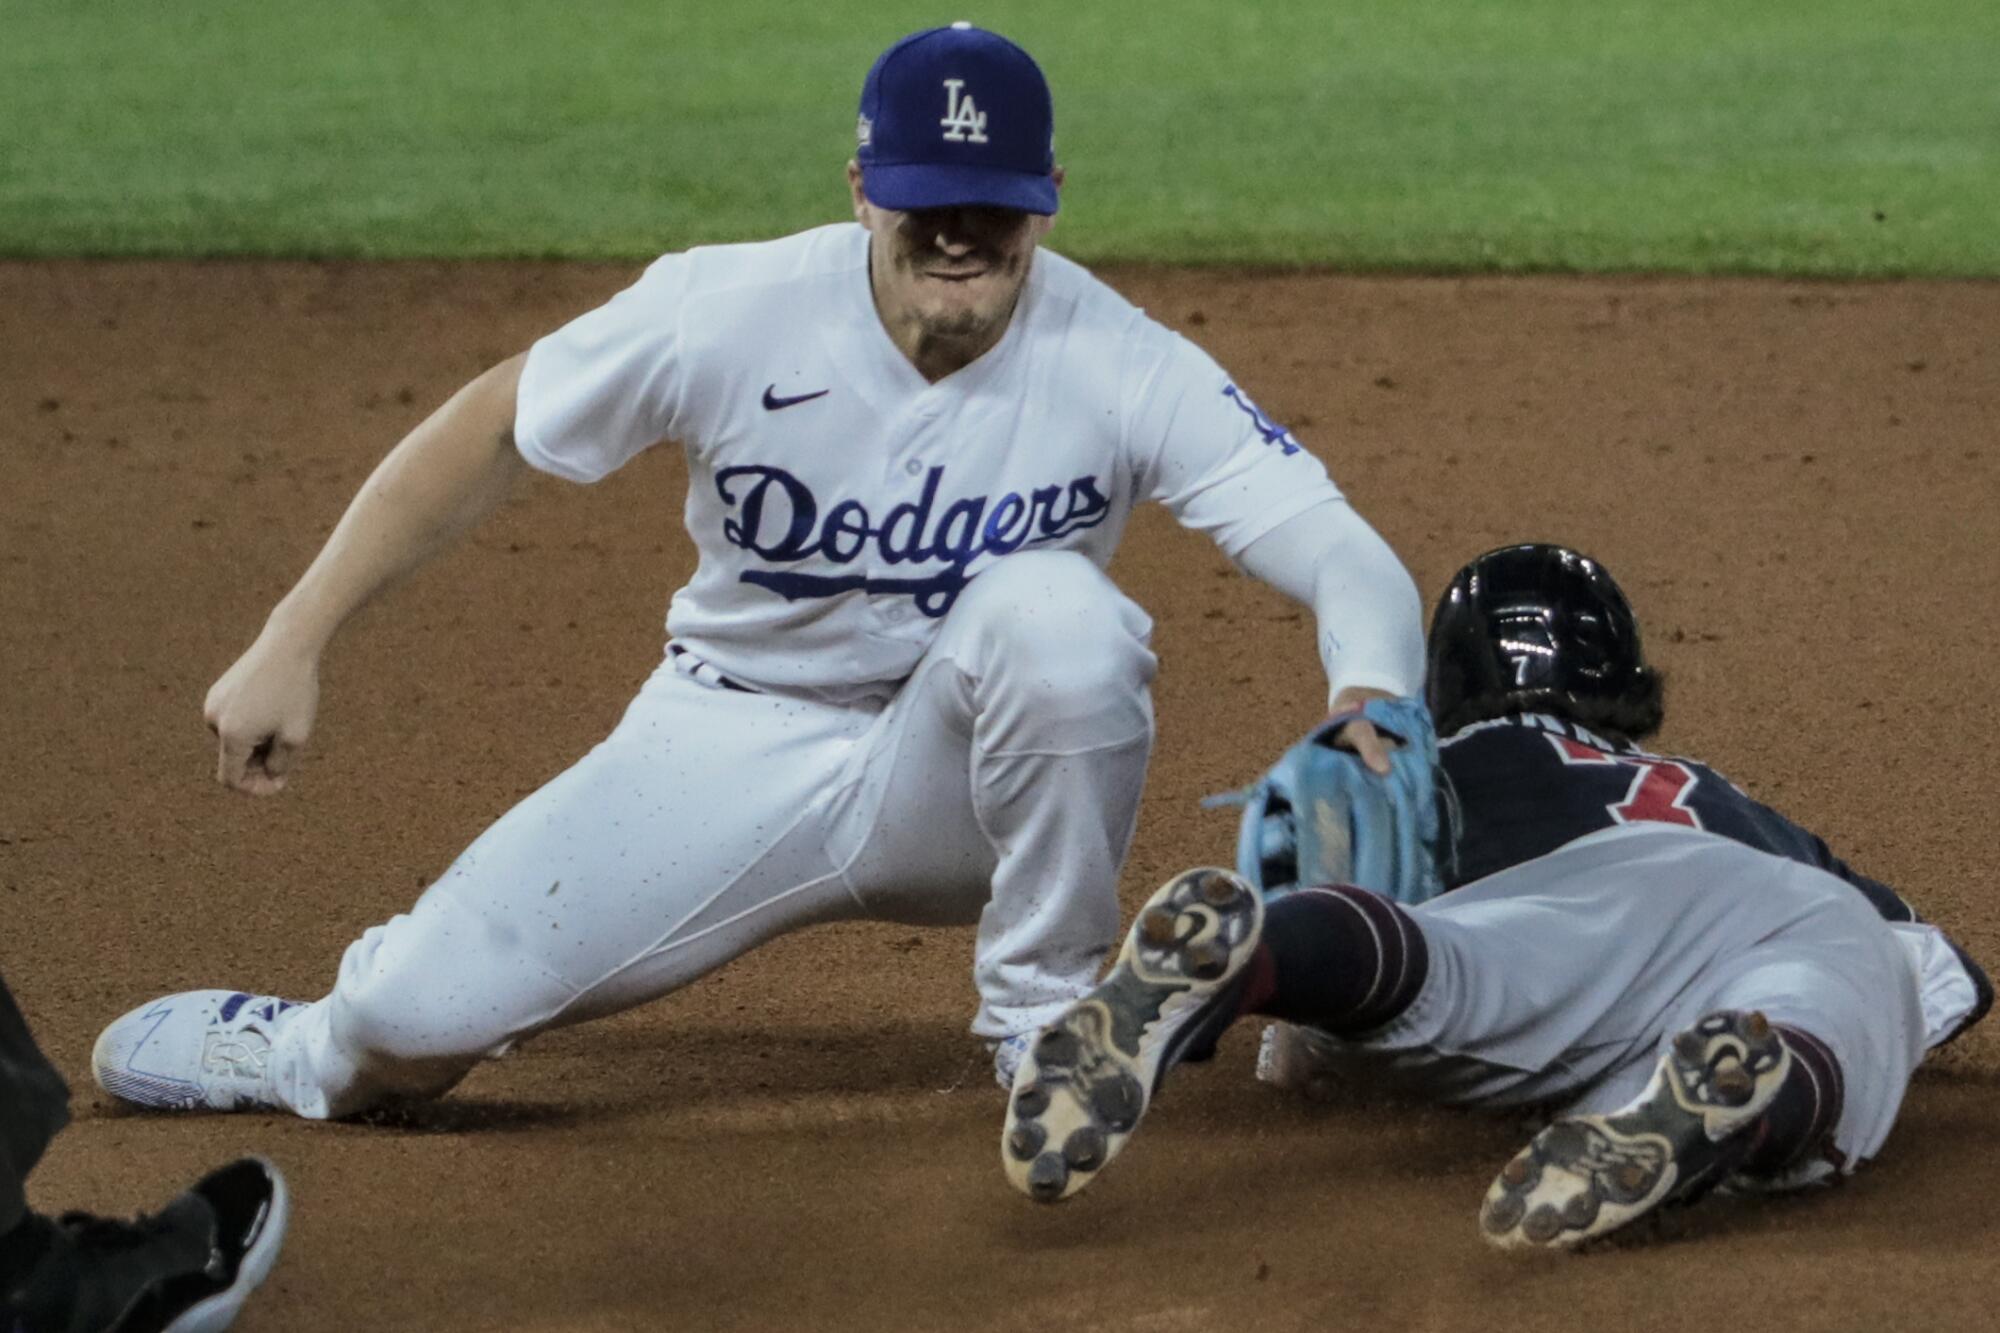 Atlanta Braves baserunner Dansby Swanson beats the tag of Dodgers second baseman Kiké Hernández to steal second.